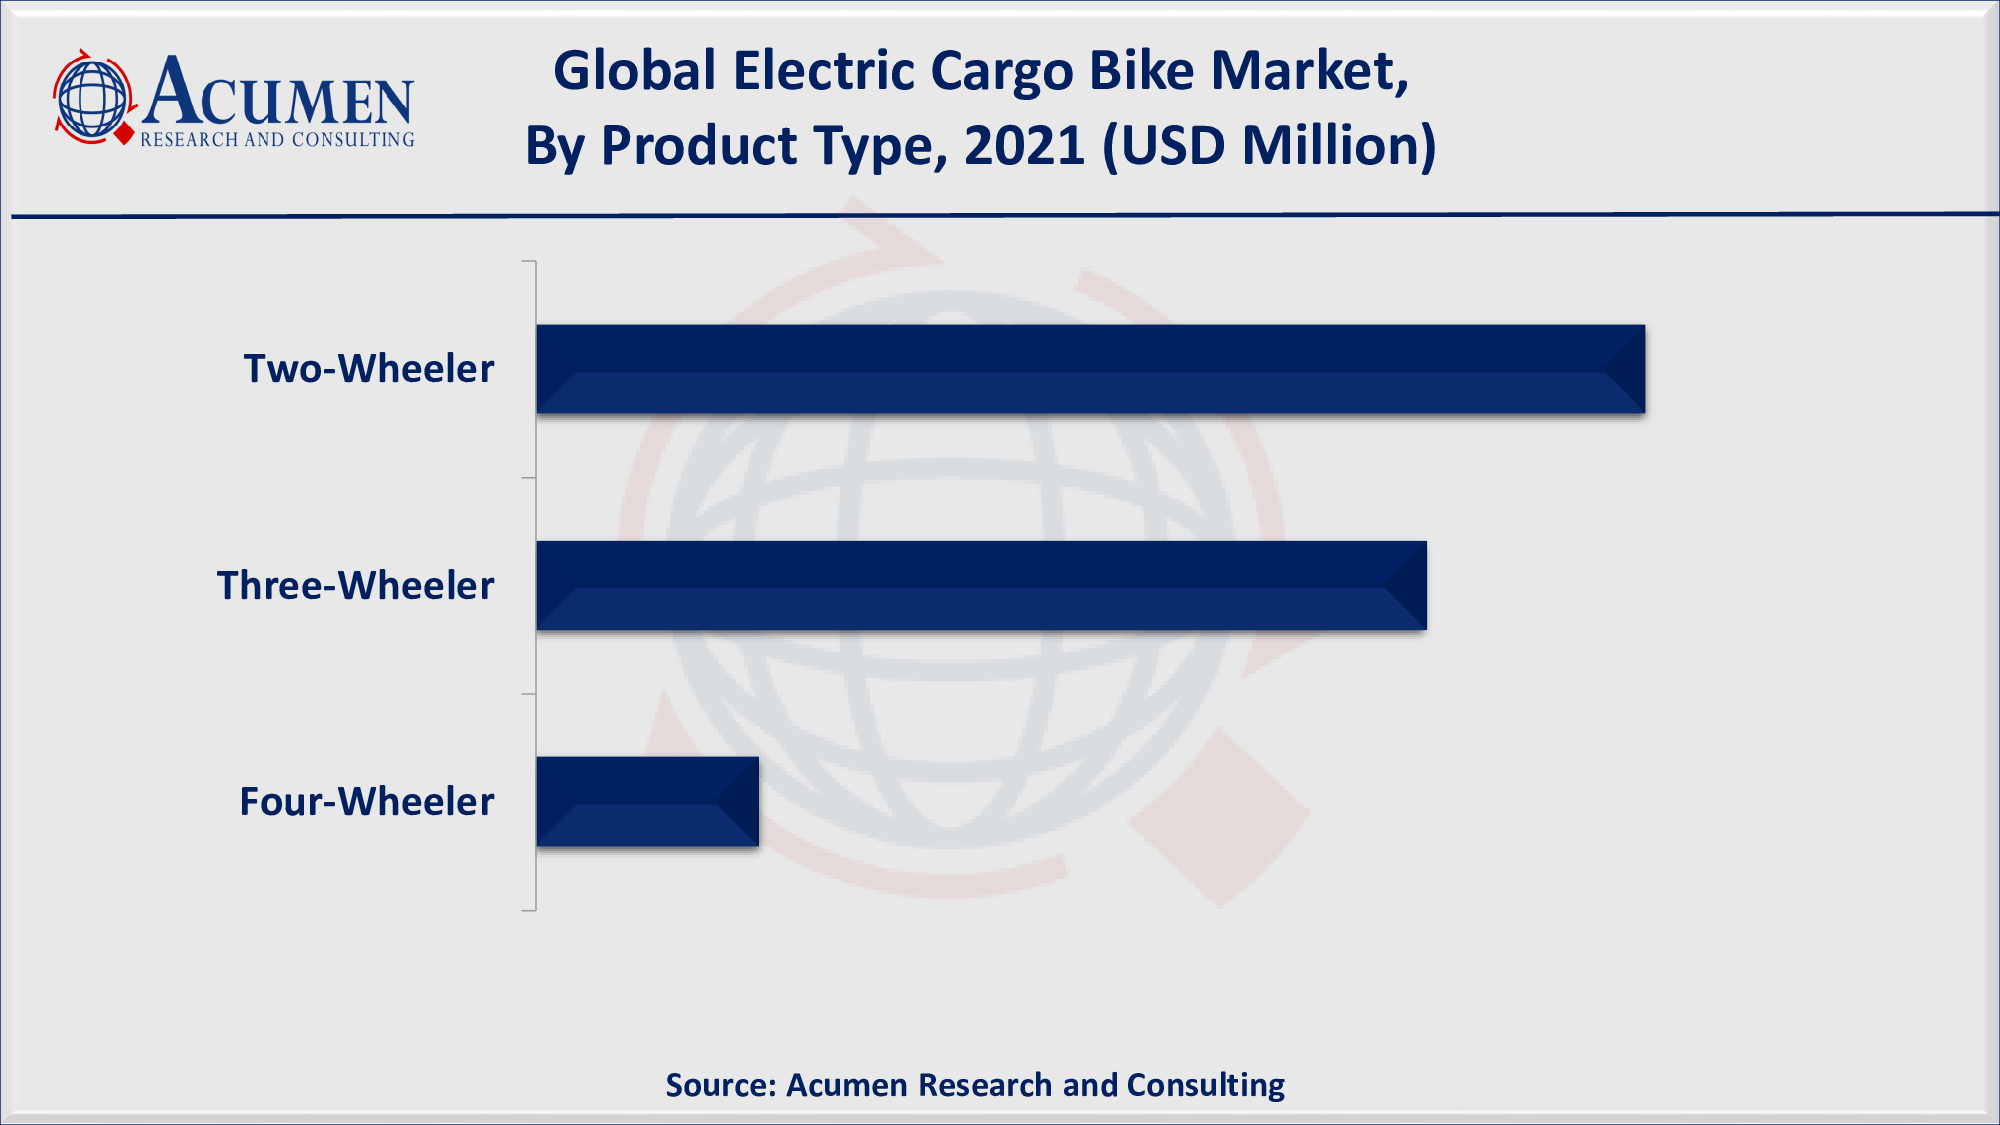 Global electric cargo bike market revenue is poised to garner USD 2,042 Million by 2030 with a CAGR of 13.7% from 2022 to 2030